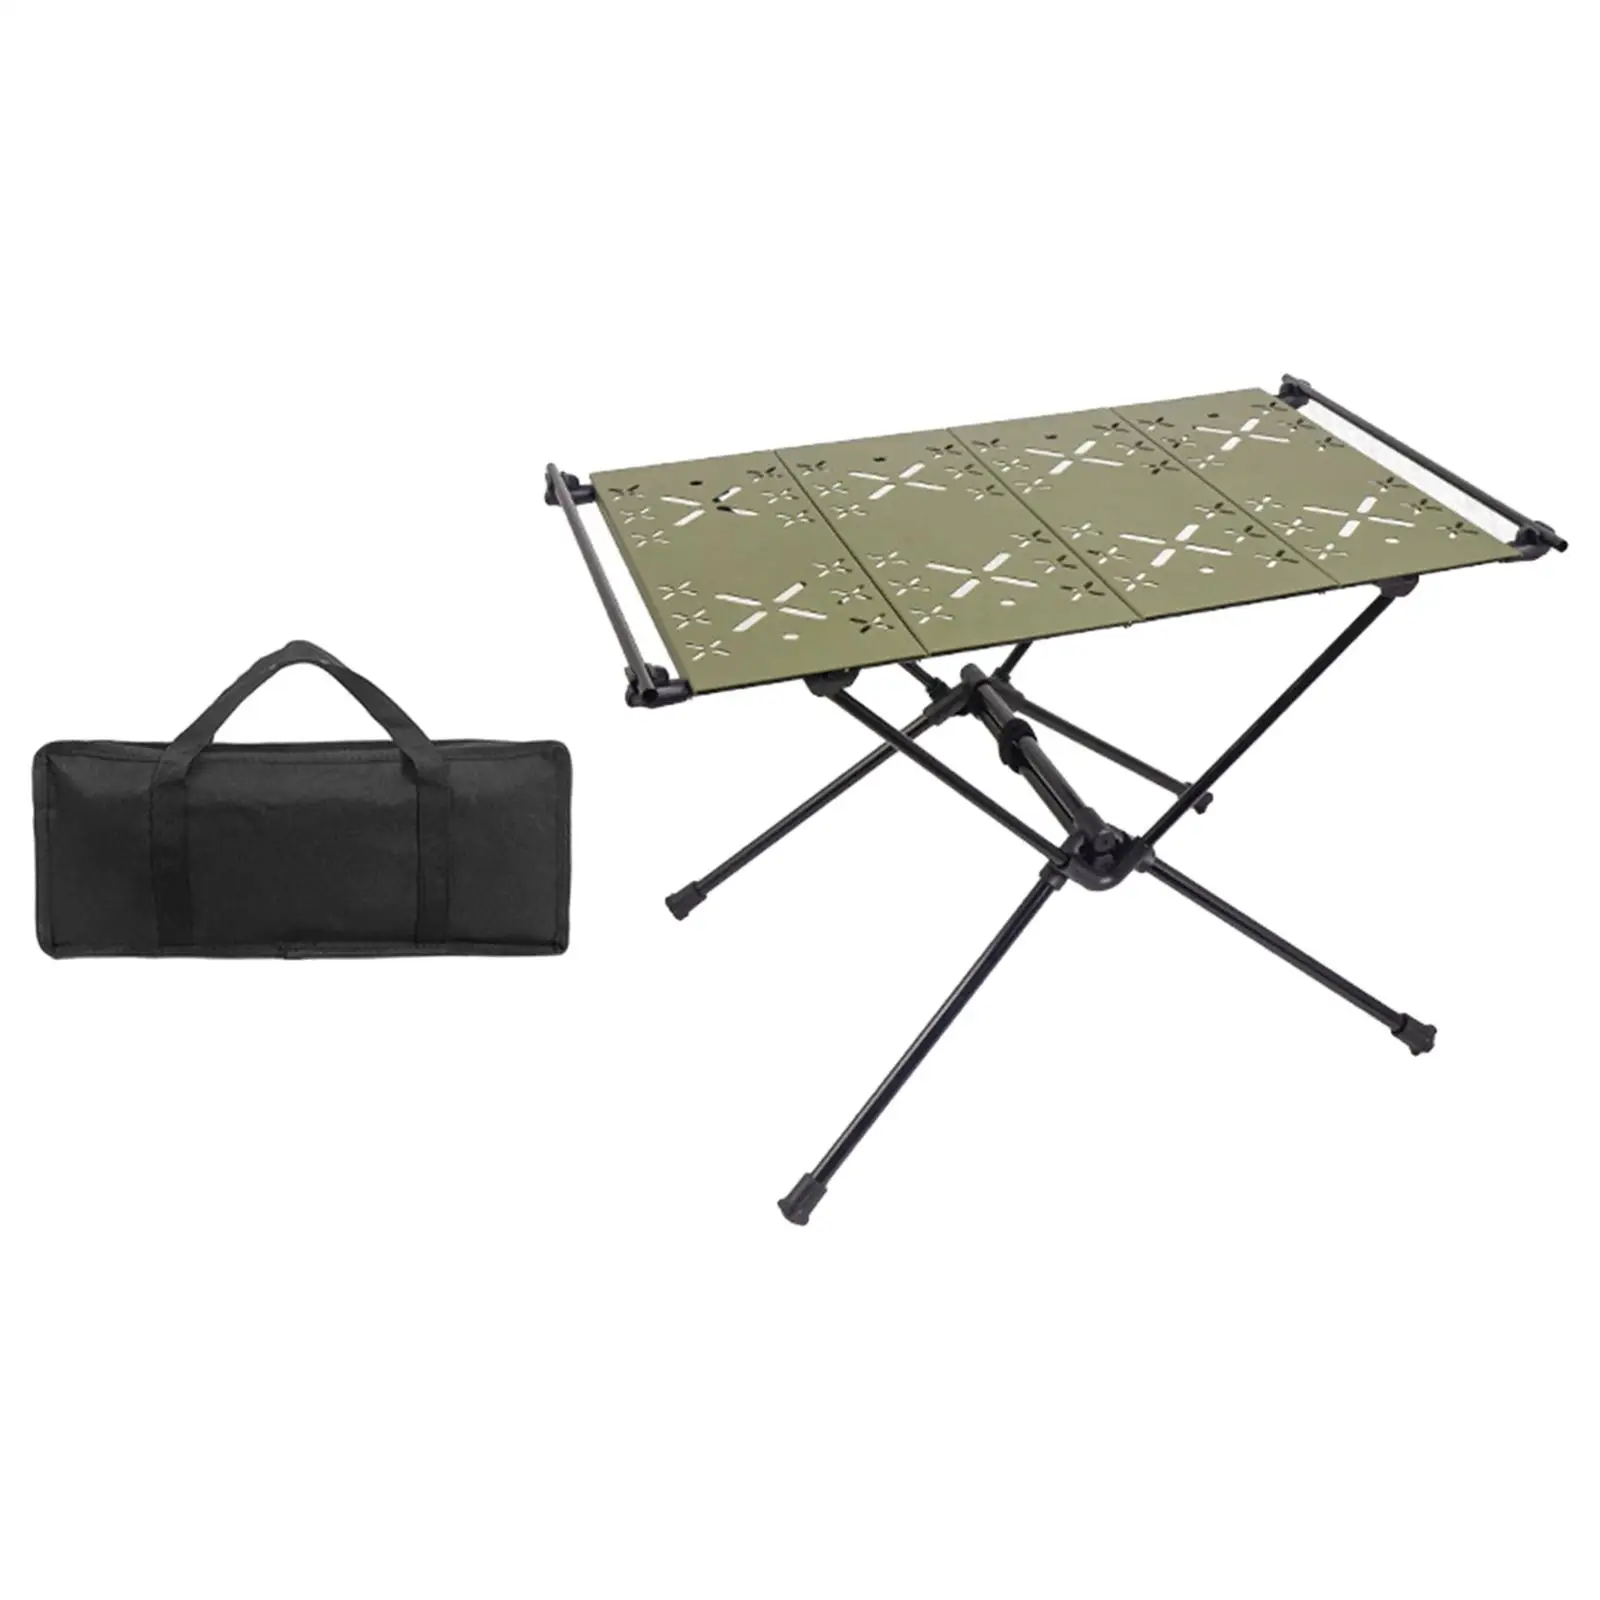 Foldable Camping Table Outdoor Foldable Table Beach Table Ultralight Desk for Backyard Backpacking Picnic Yard Travel